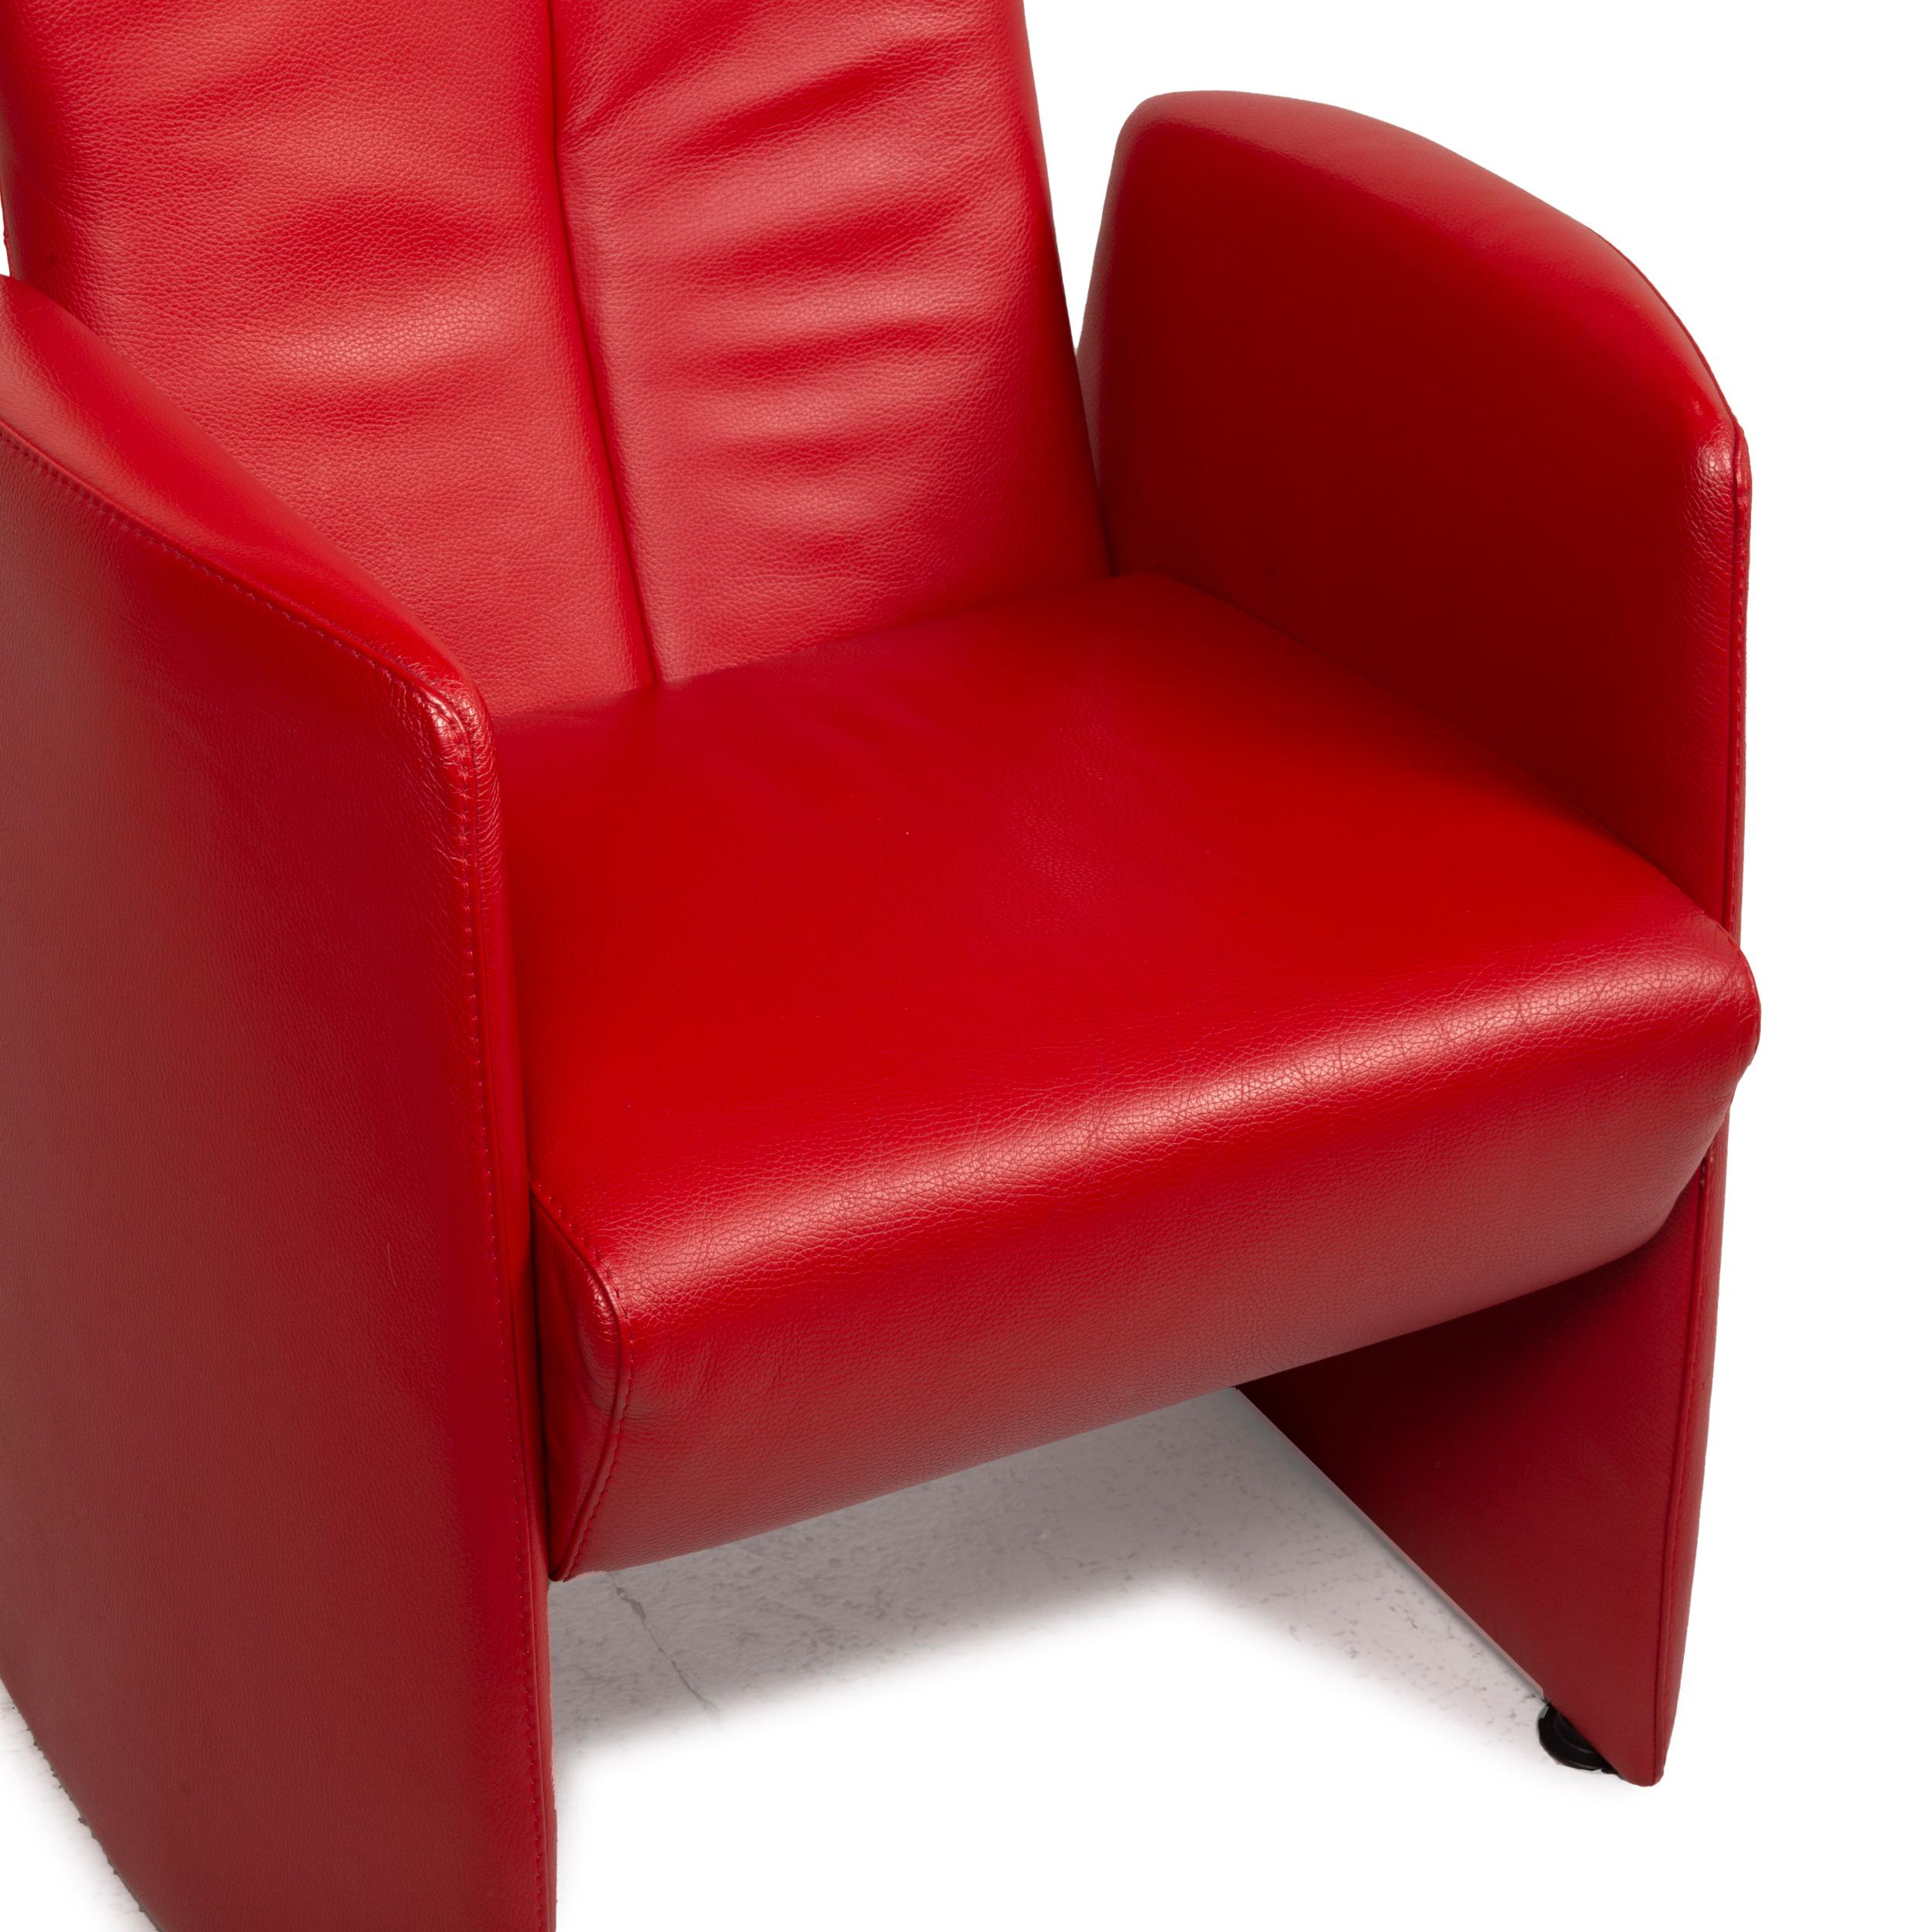 Dutch Leolux Leather Armchair Red Relaxation Function